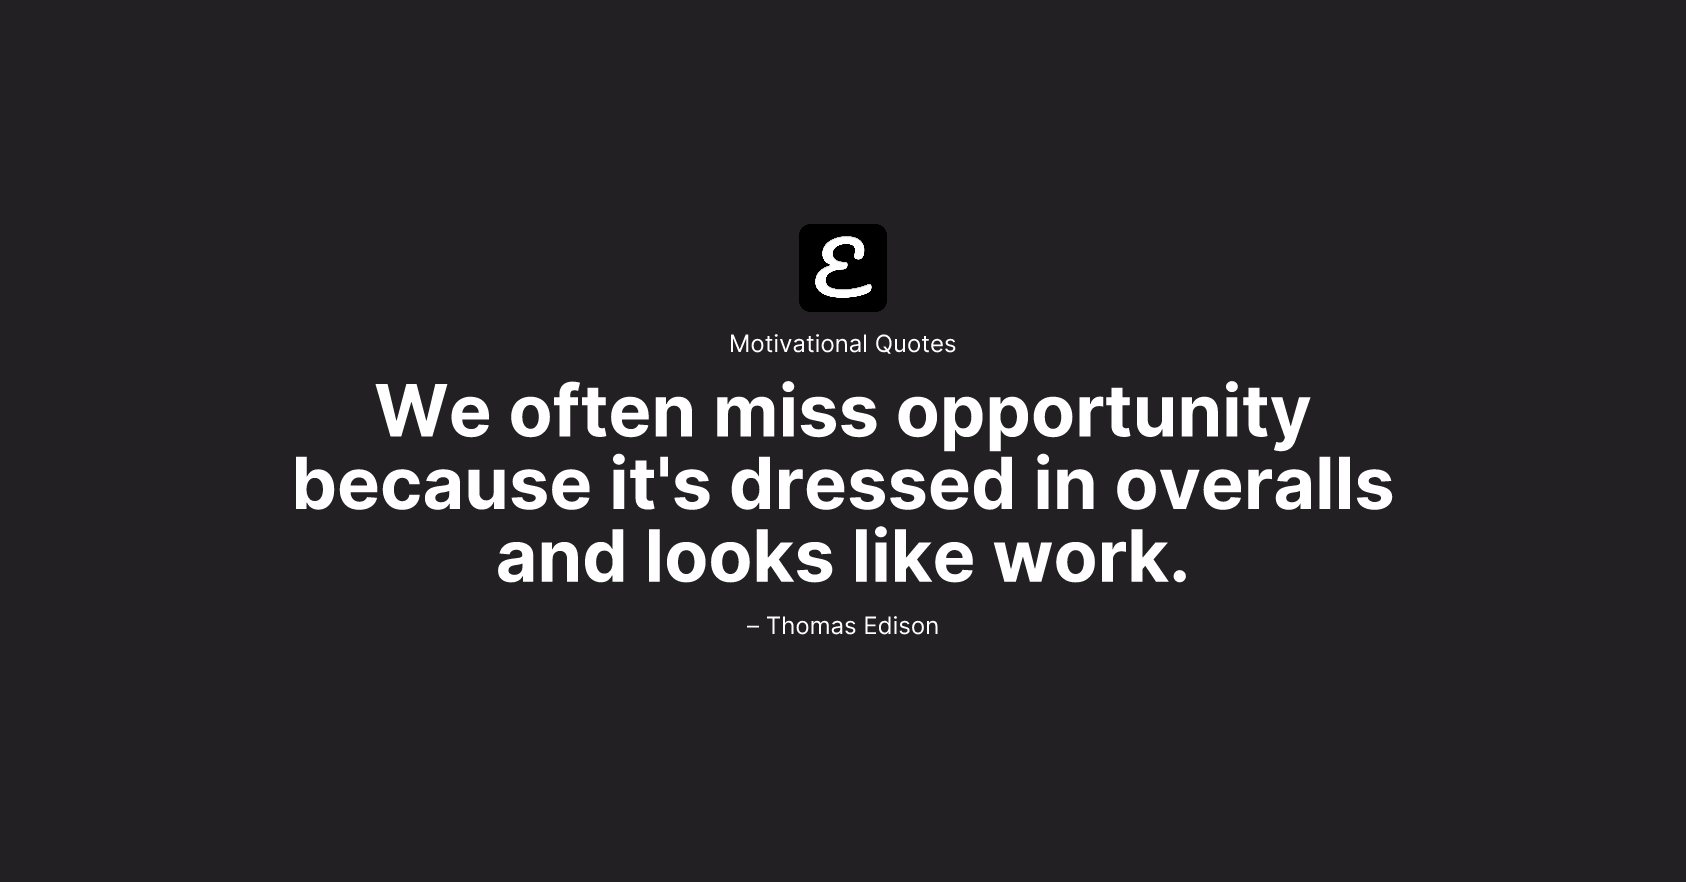 Thomas Edison - We often miss opportunity because it's dressed in overalls and looks like work.